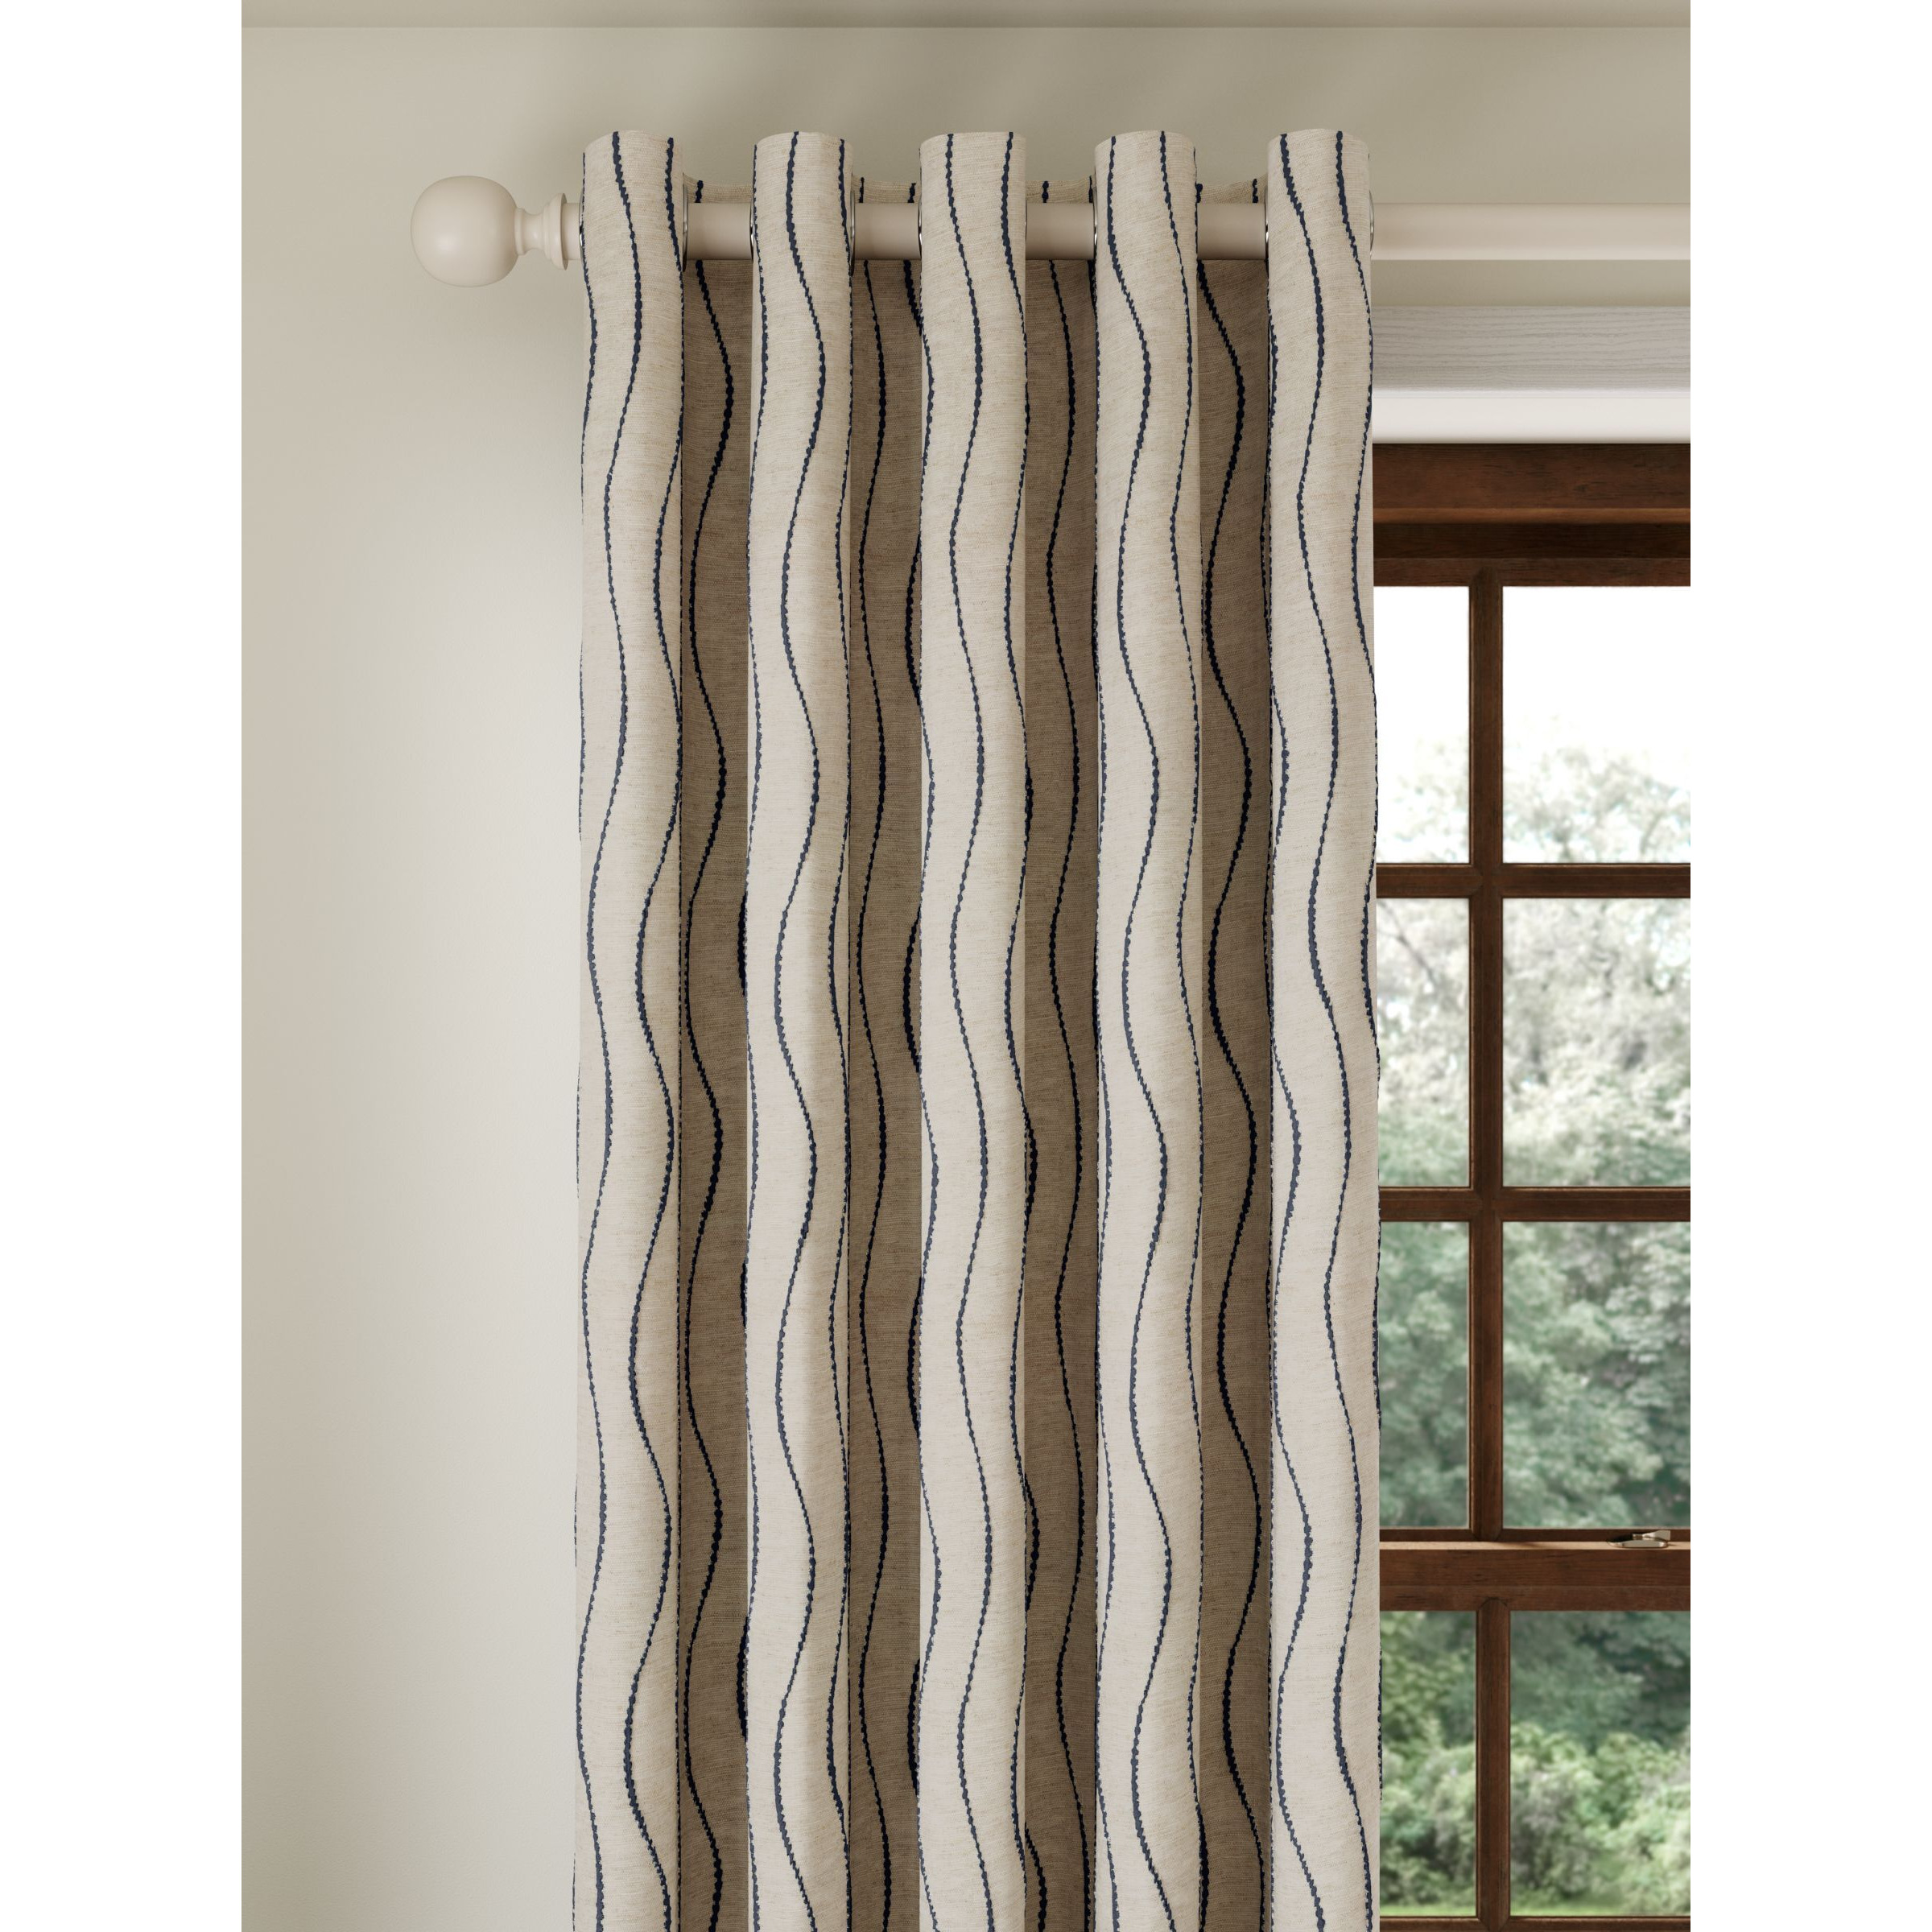 John Lewis Picot Stripe Embroidery Pair Lined Eyelet Curtains - image 1